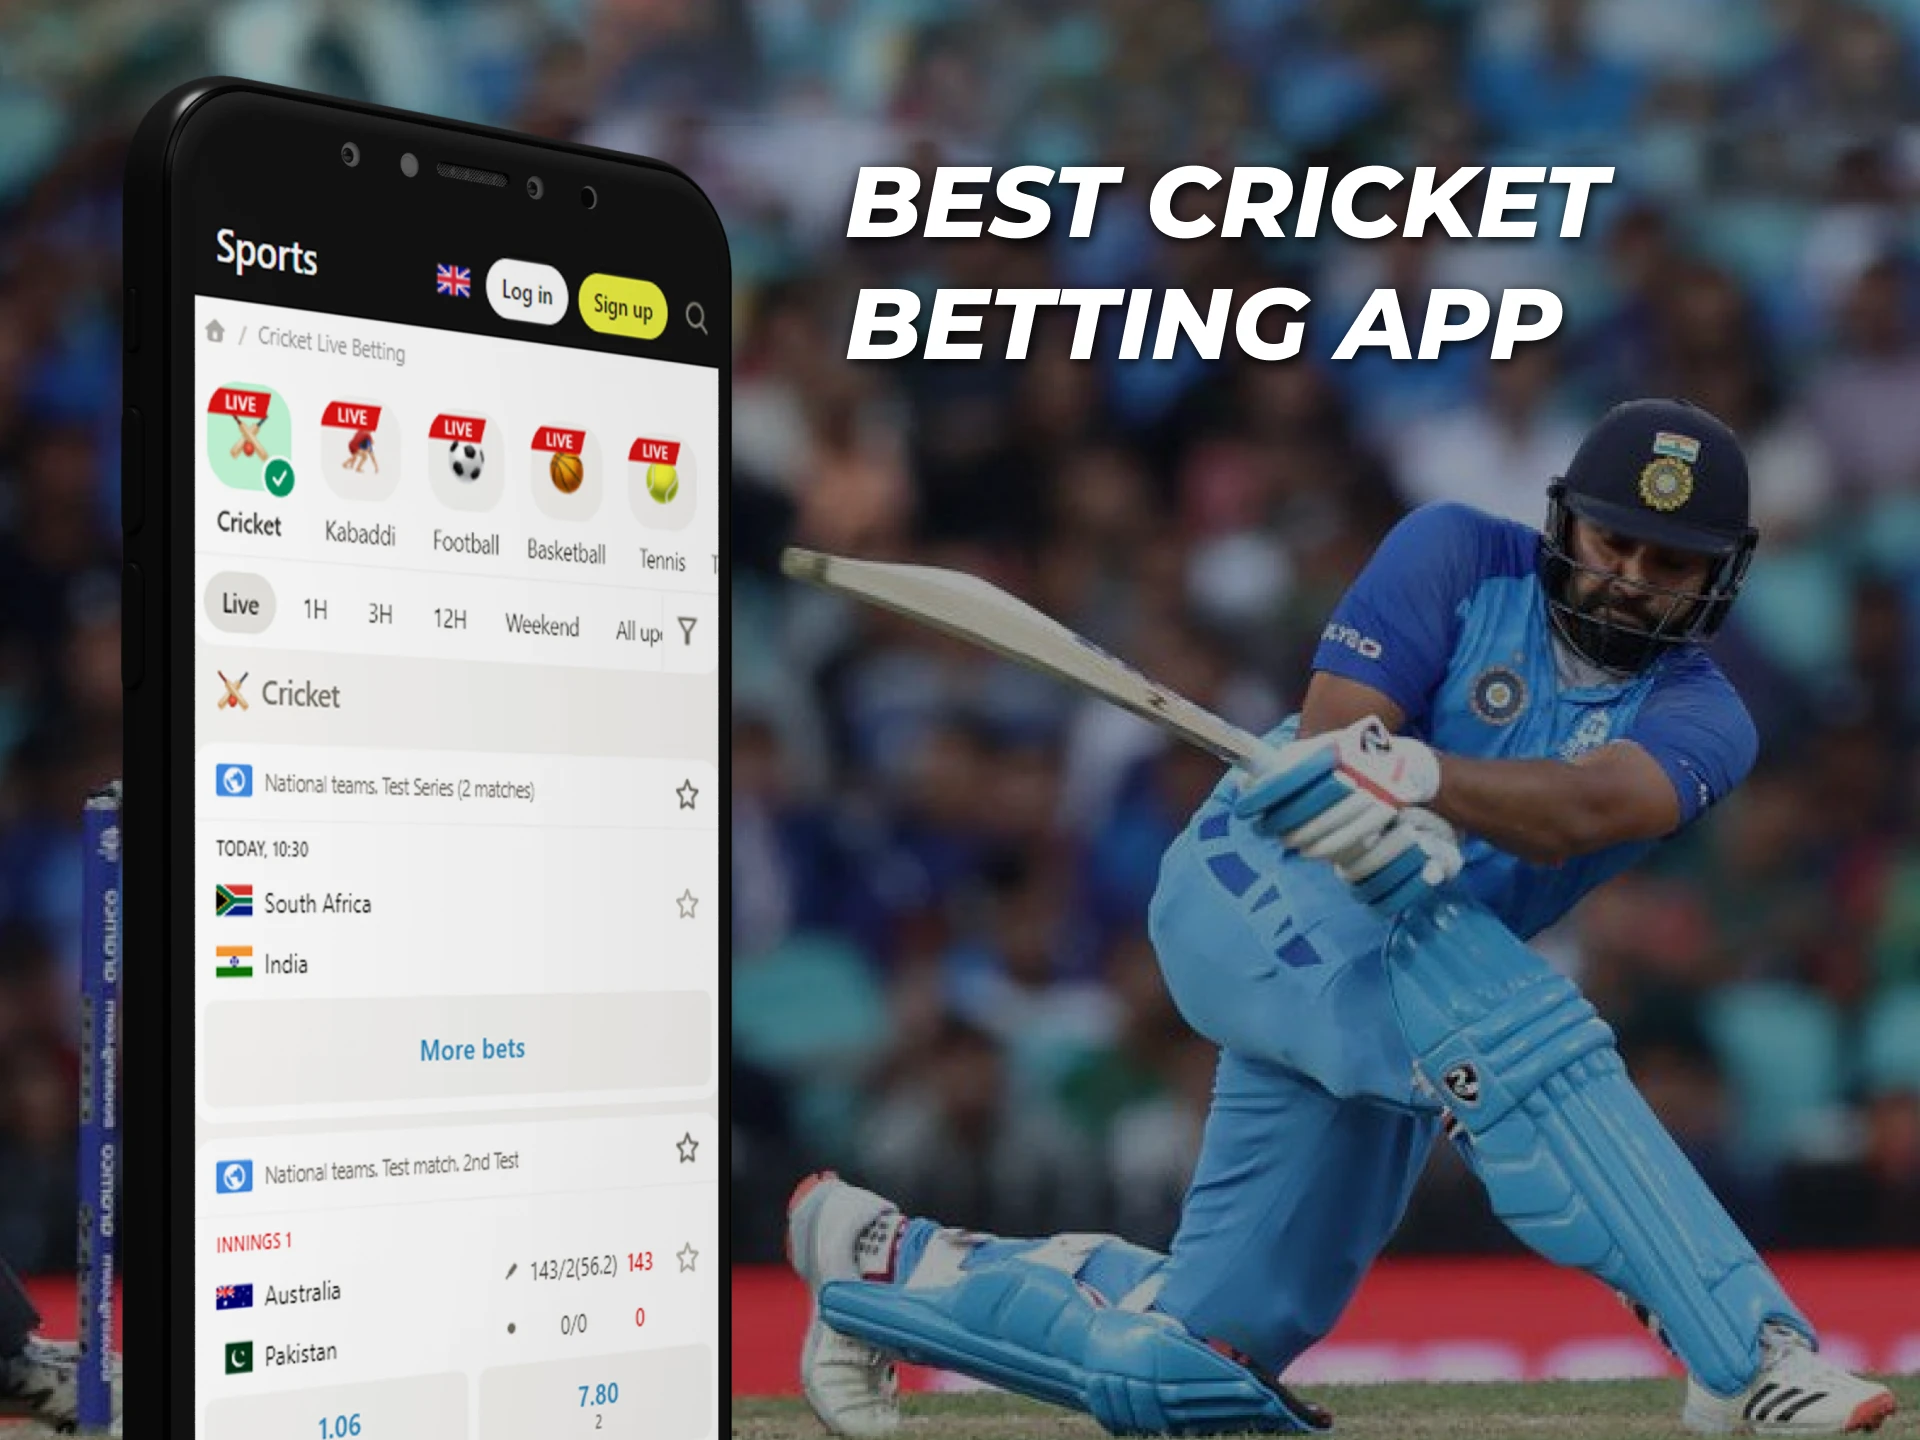 Find out which app is best for cricket betting.